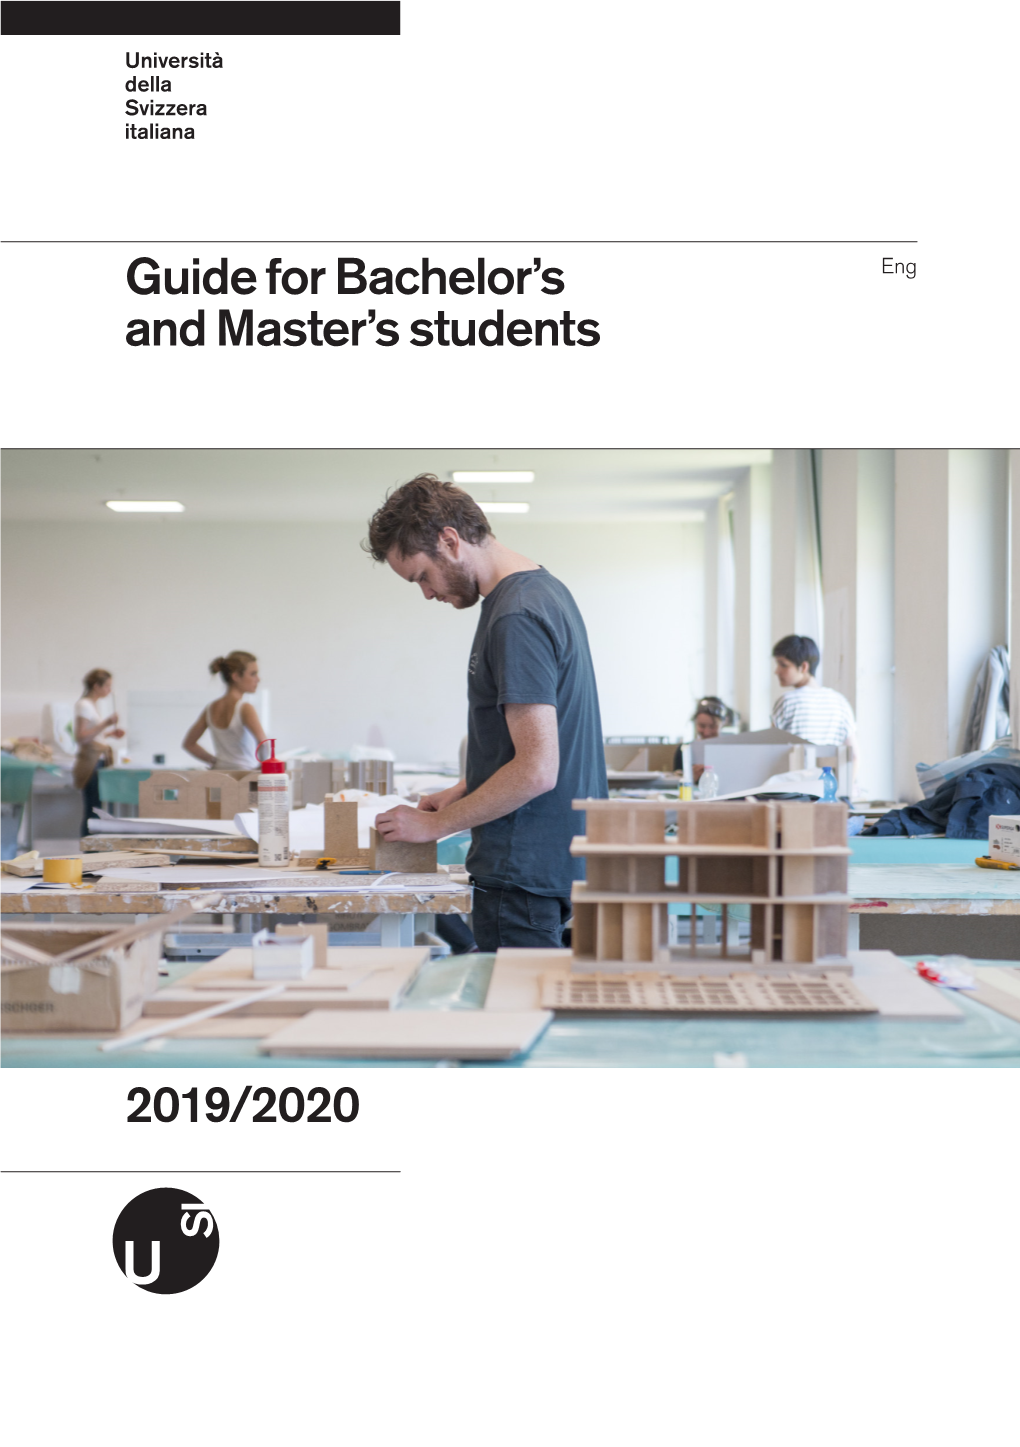 2019/2020 Guide for Bachelor's and Master's Students